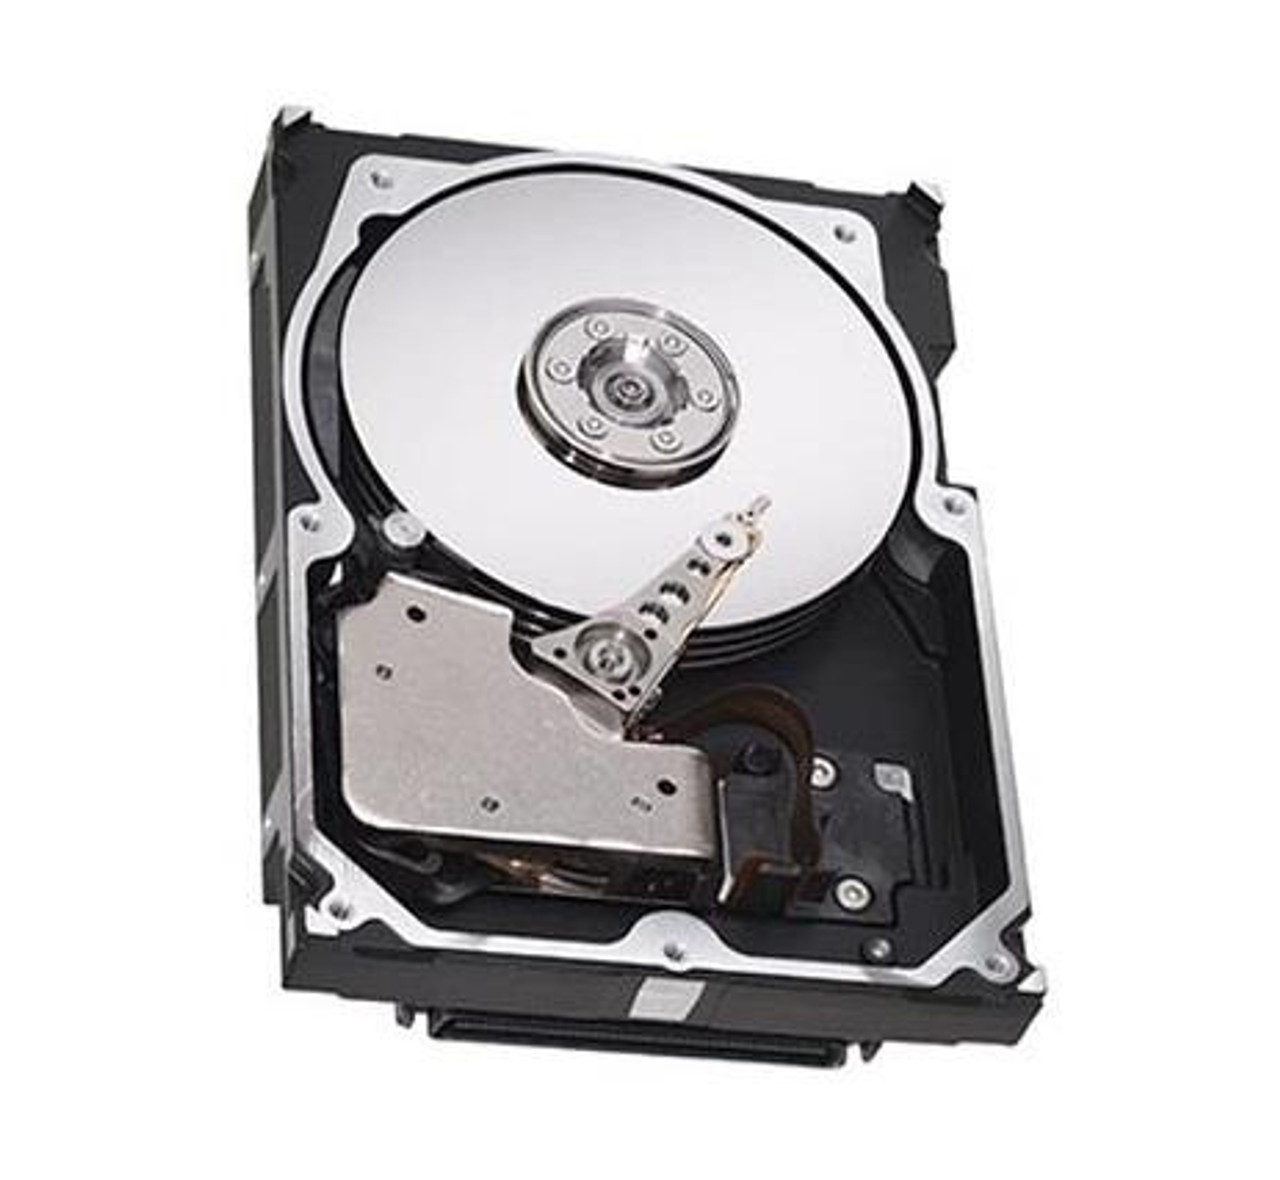 CCS-HD-600GB Cisco 600GB 10000RPM SAS 12Gbps 2.5-inch Internal Hard Drive for Cisco Content Security